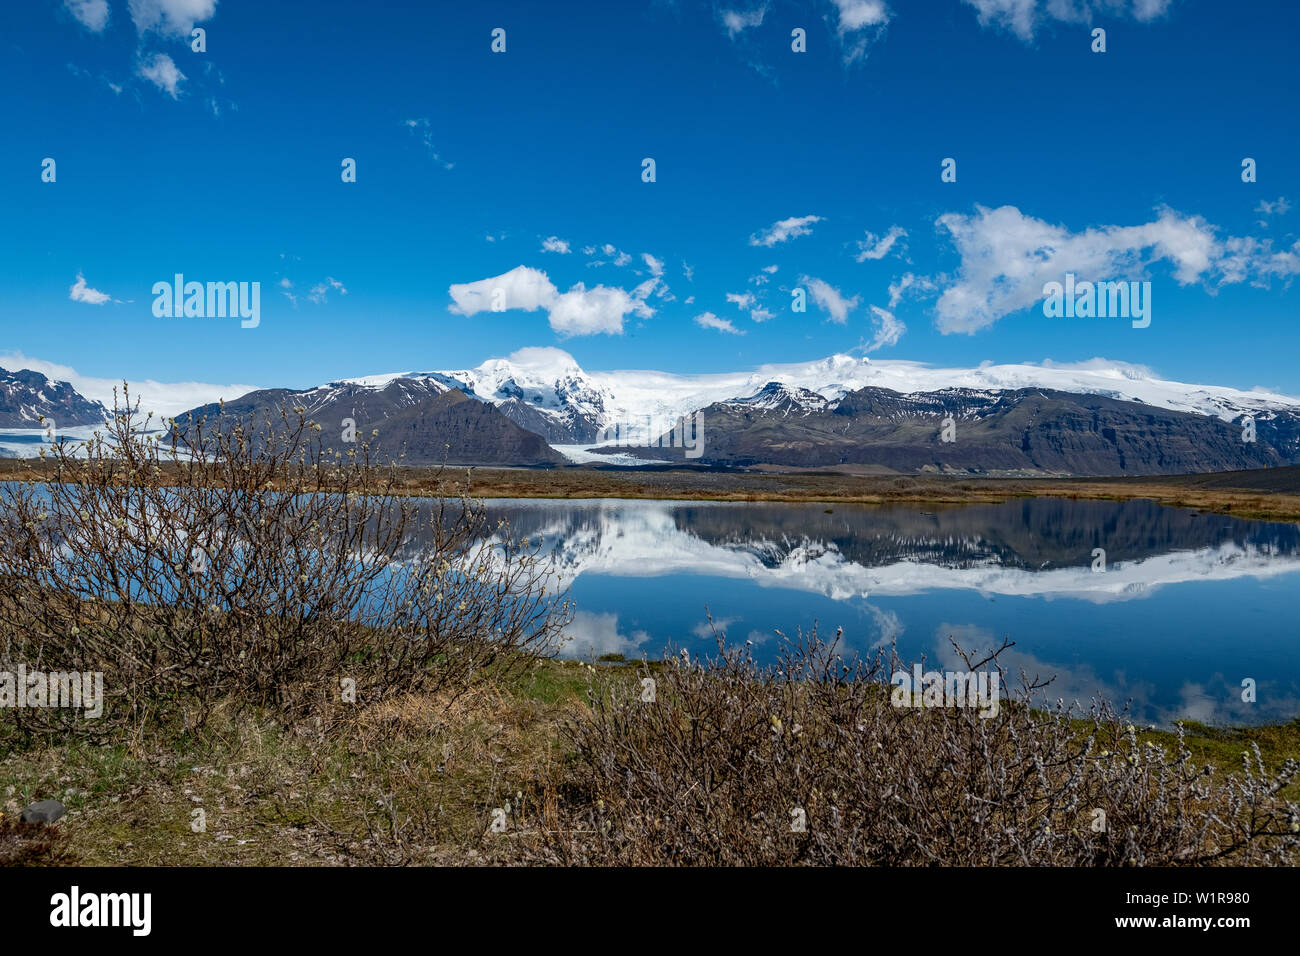 Vast landscape of the mountains, lakes and glaciers of the Skaftafell region of southeastern Iceland Stock Photo